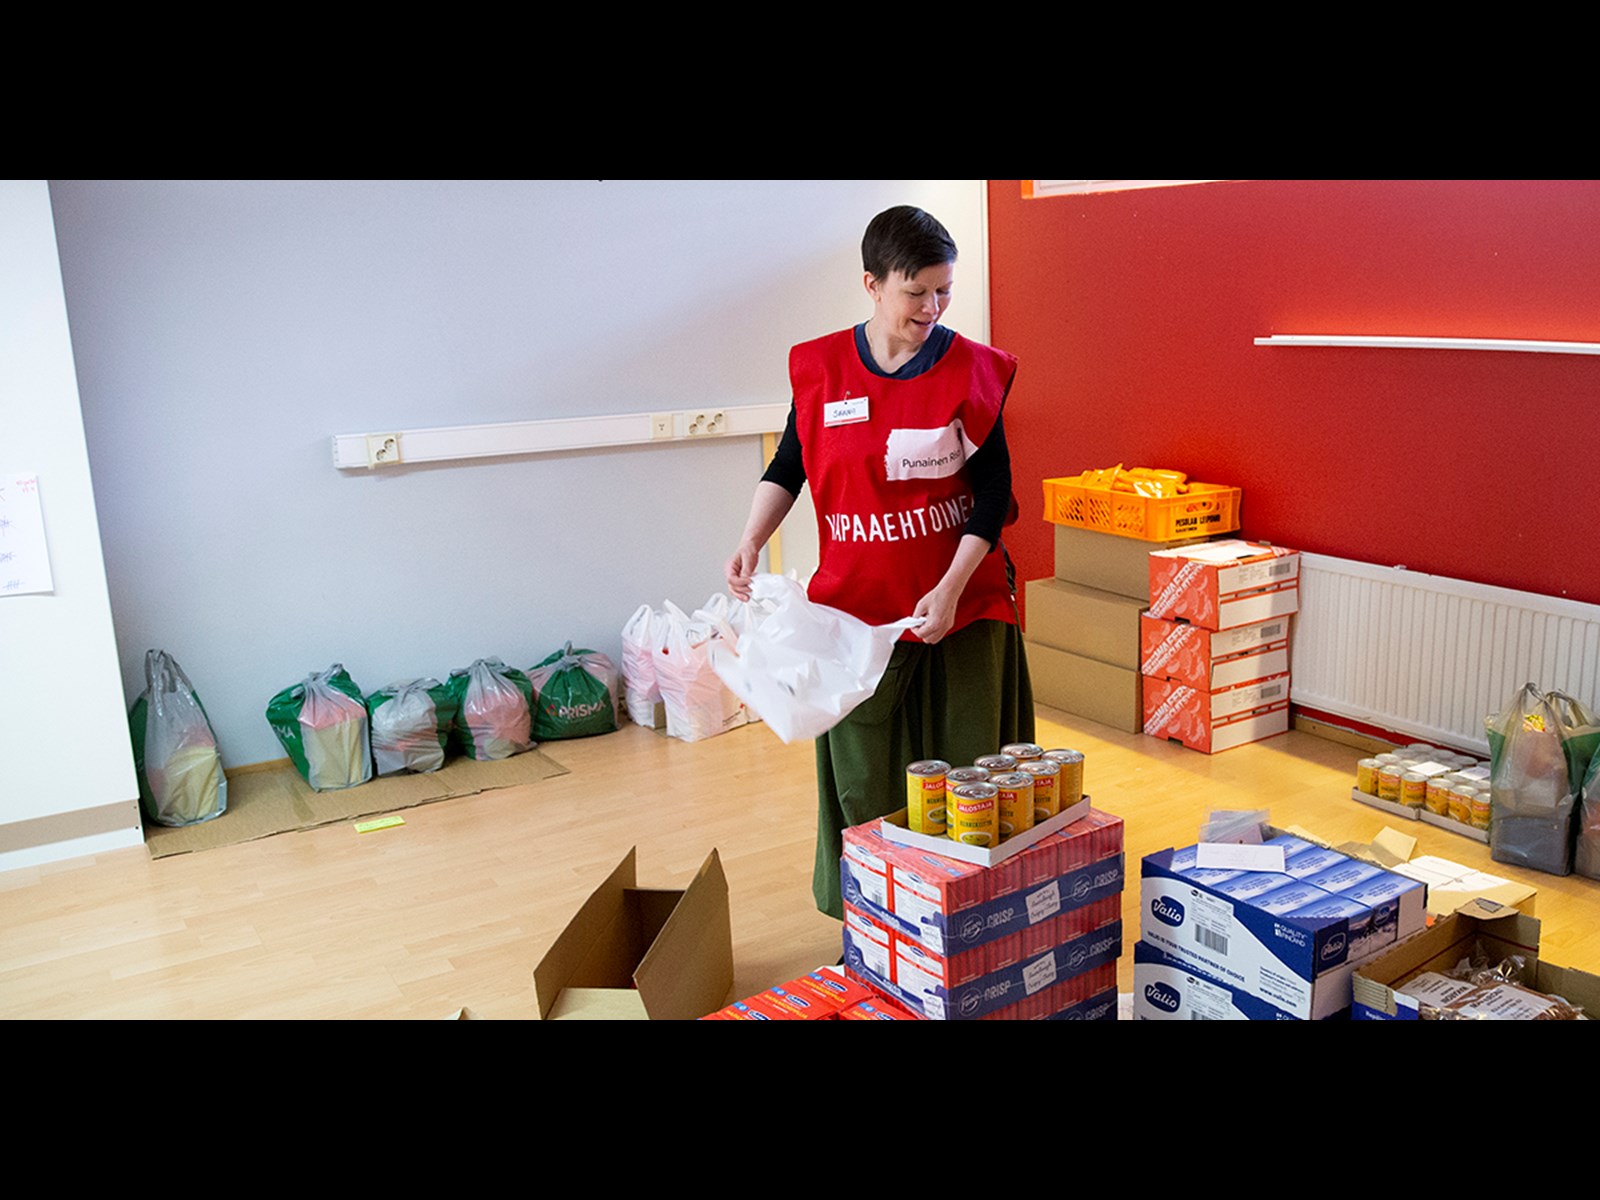 Food distribution often vital for coping - Finnish Red Cross